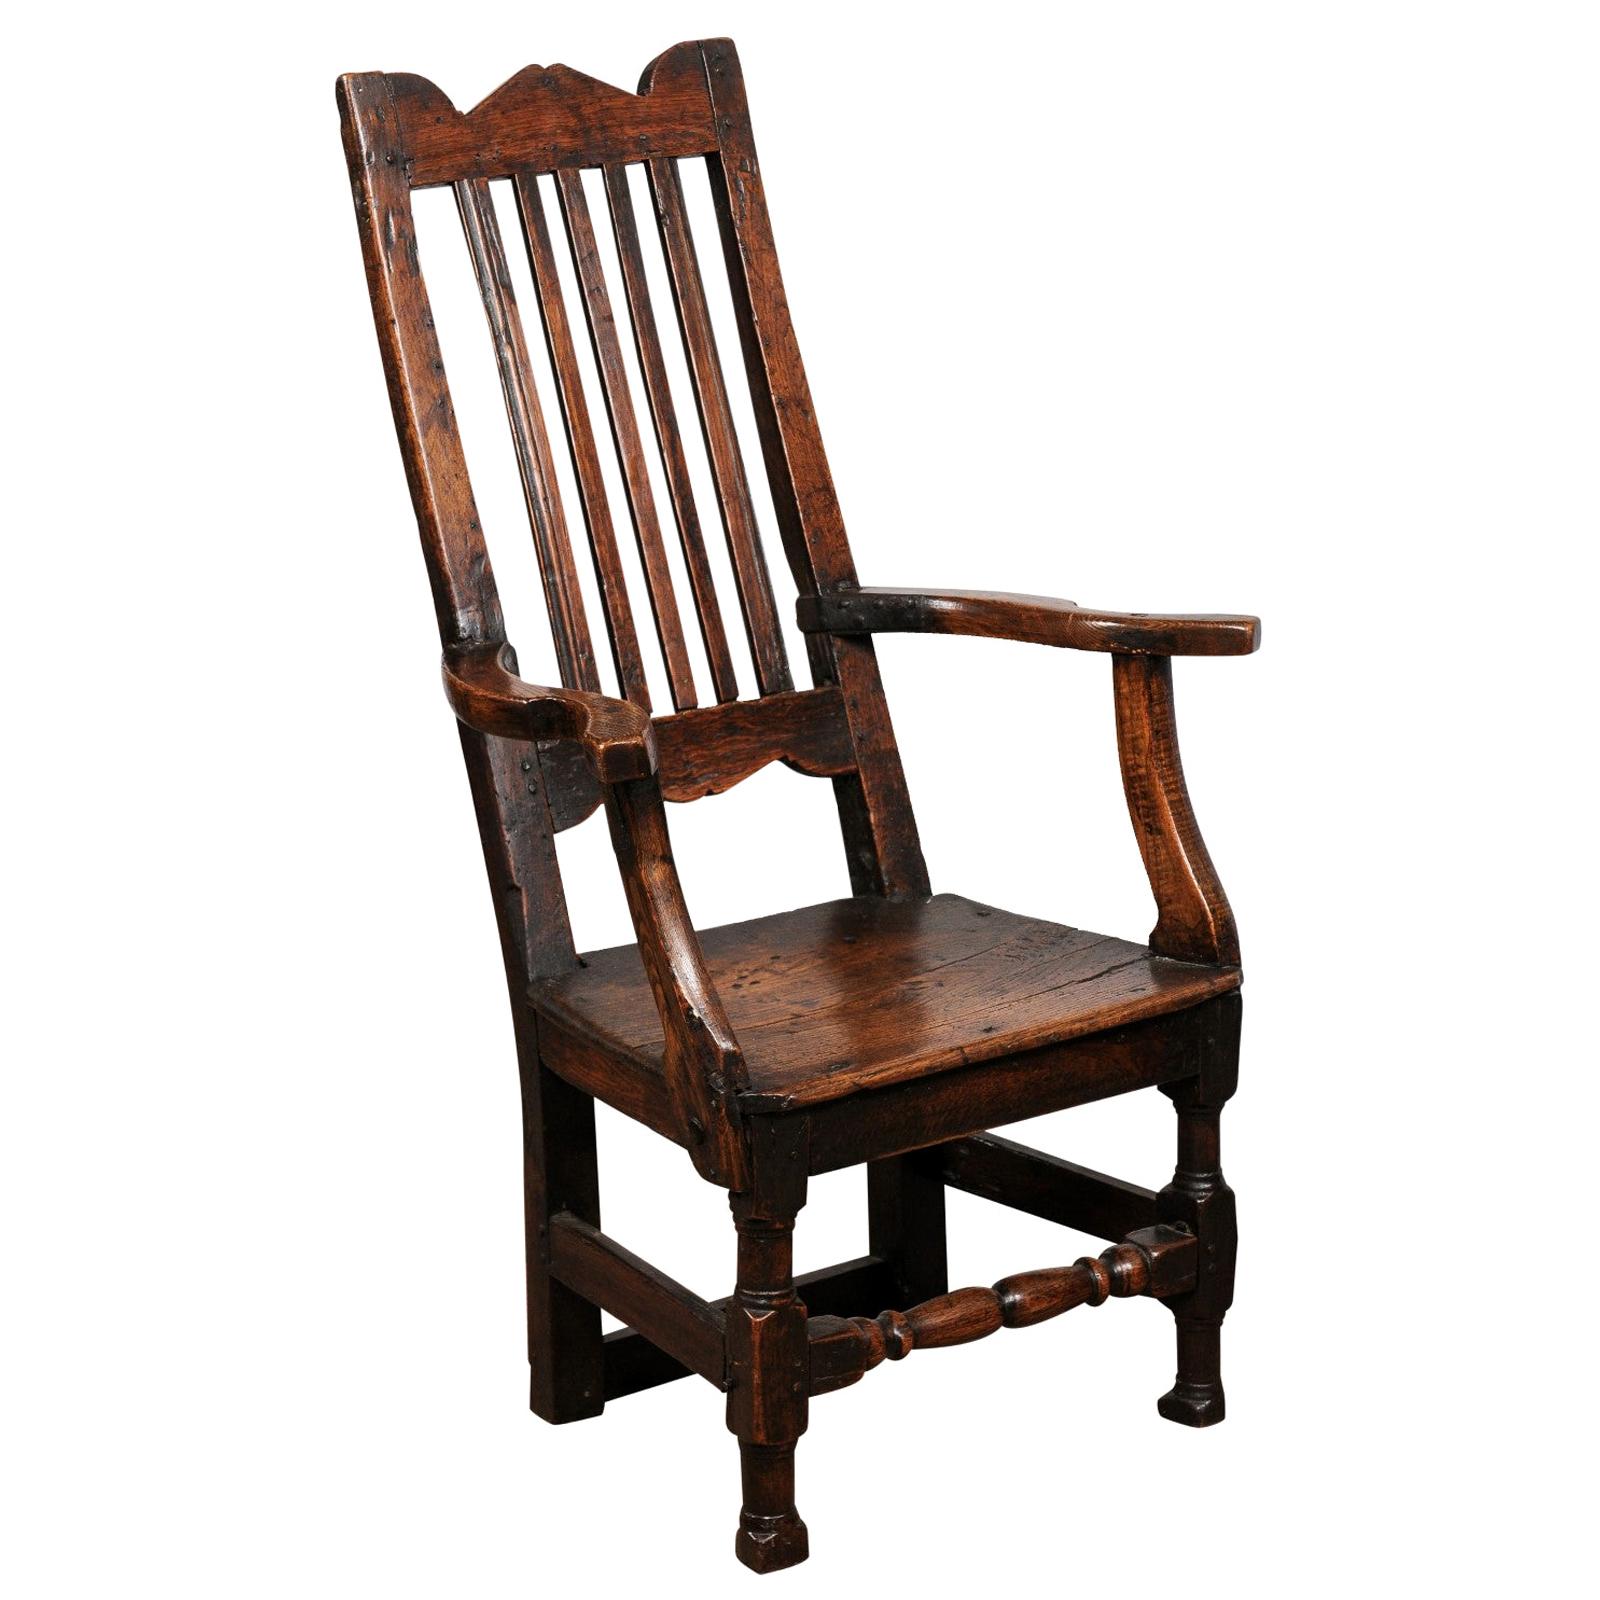 Petite Oak Arm Chair with Turned Stretcher, England, 18th Century